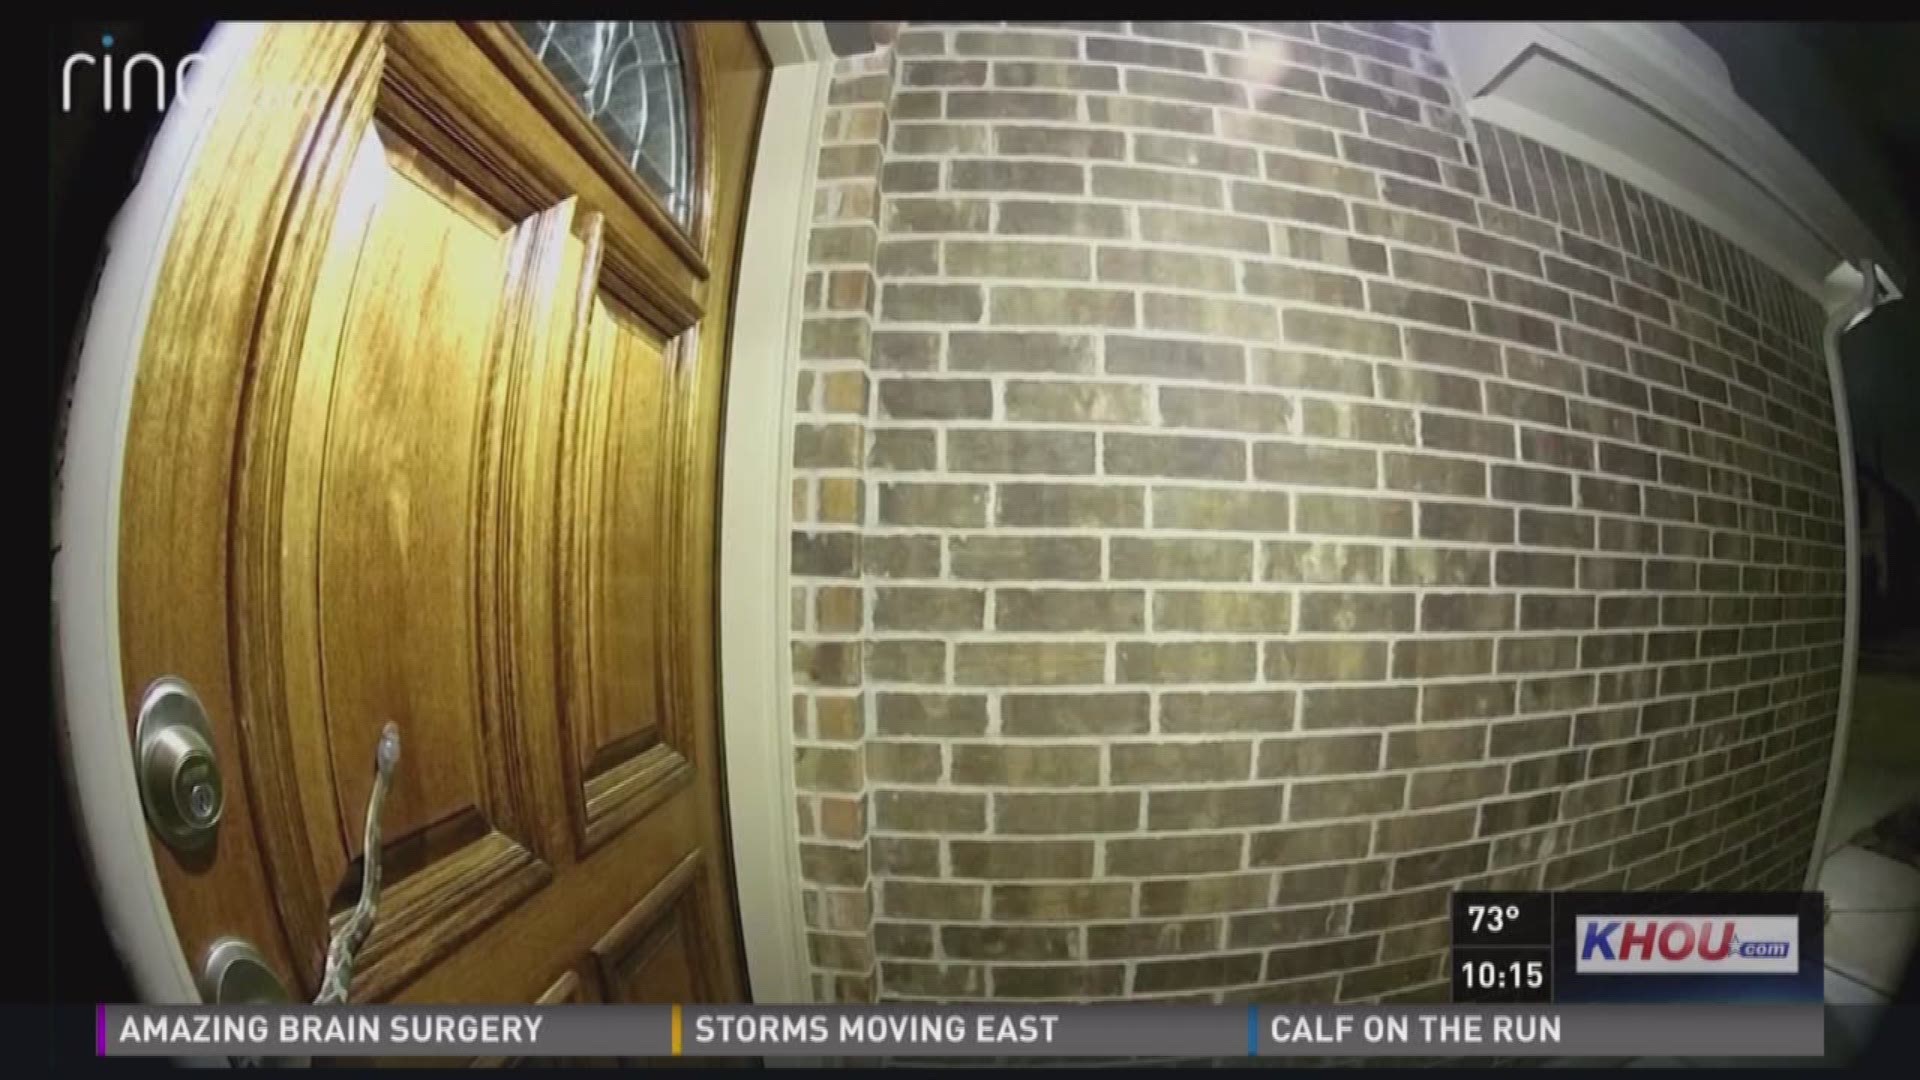 It's always a little unnerving when you get an alert in the middle of the night that someone is at your door, but one woman in Spring wasn't ready for what she saw when she checked her doorbell camera.